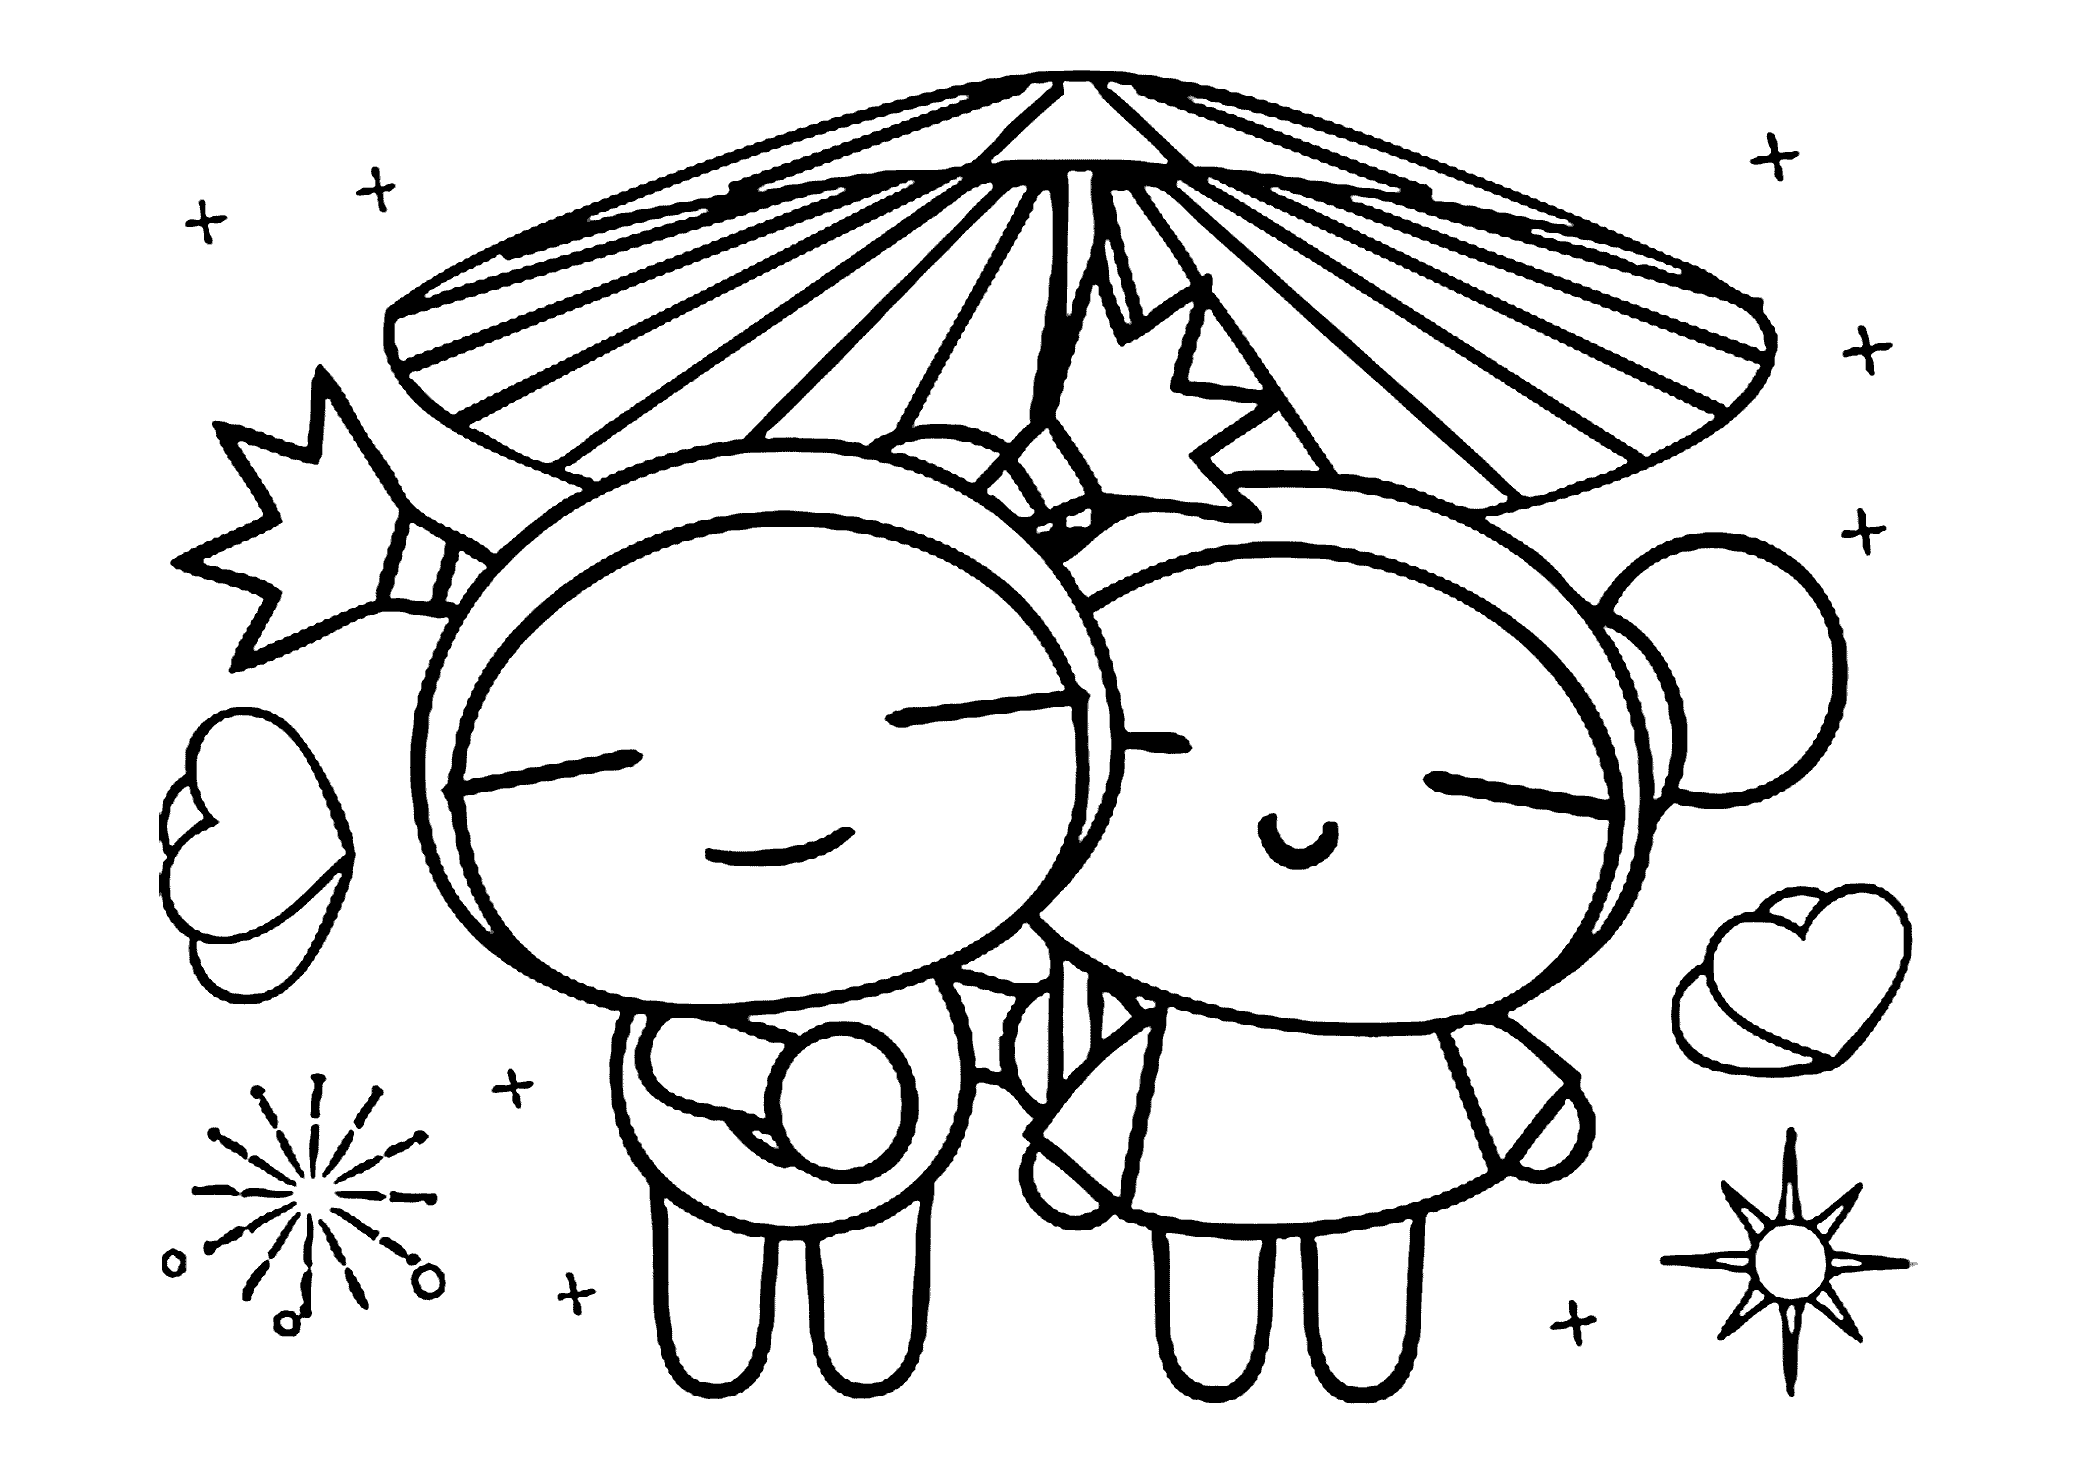 Pucca - Coloring Pages For Kids And For Adults - Coloring Home